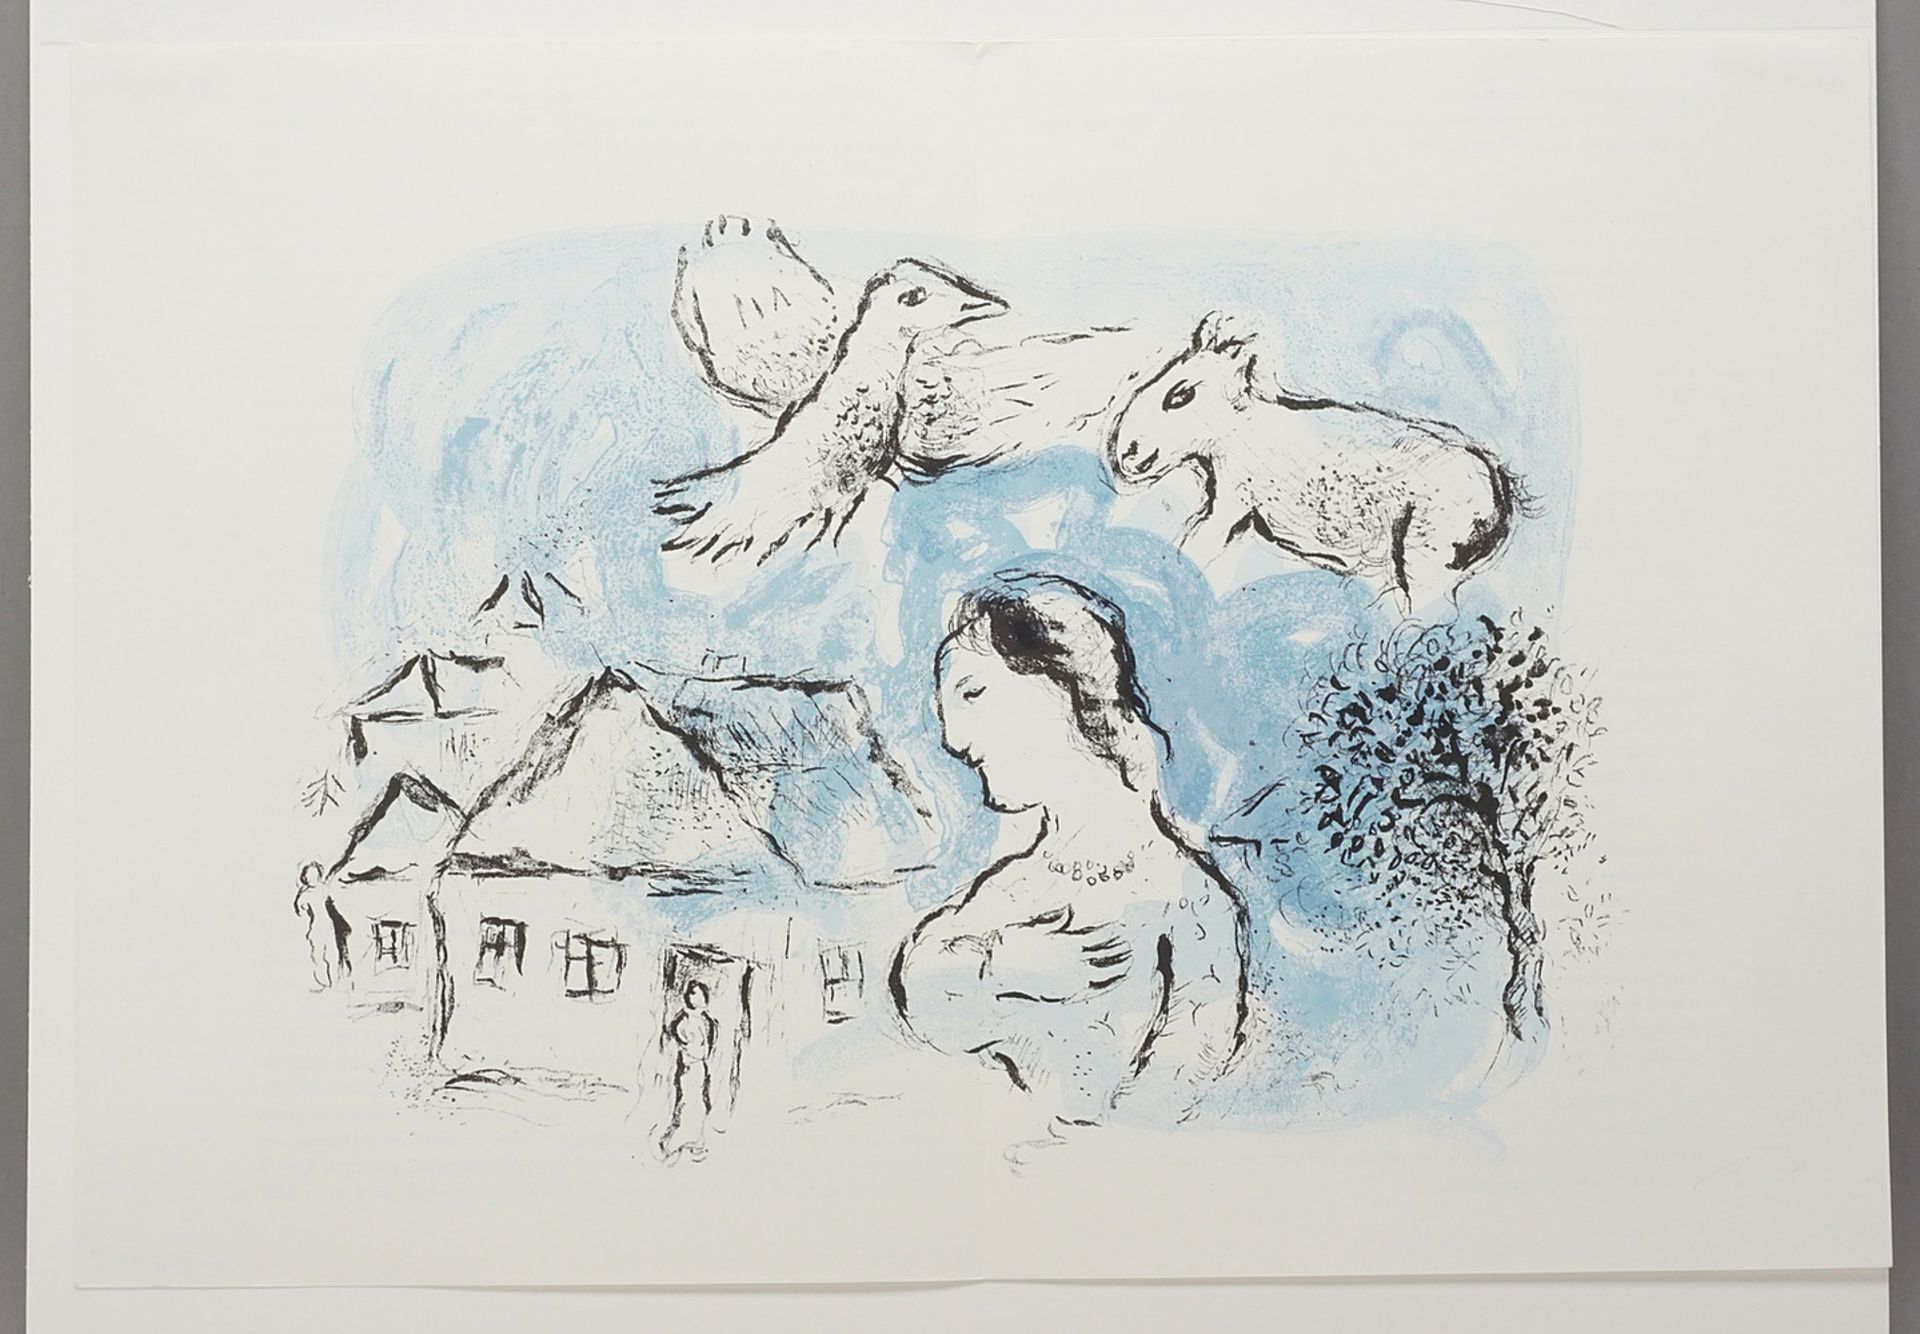 Marc Chagall (1887-1985), "Le village" (The Village) - Image 3 of 4